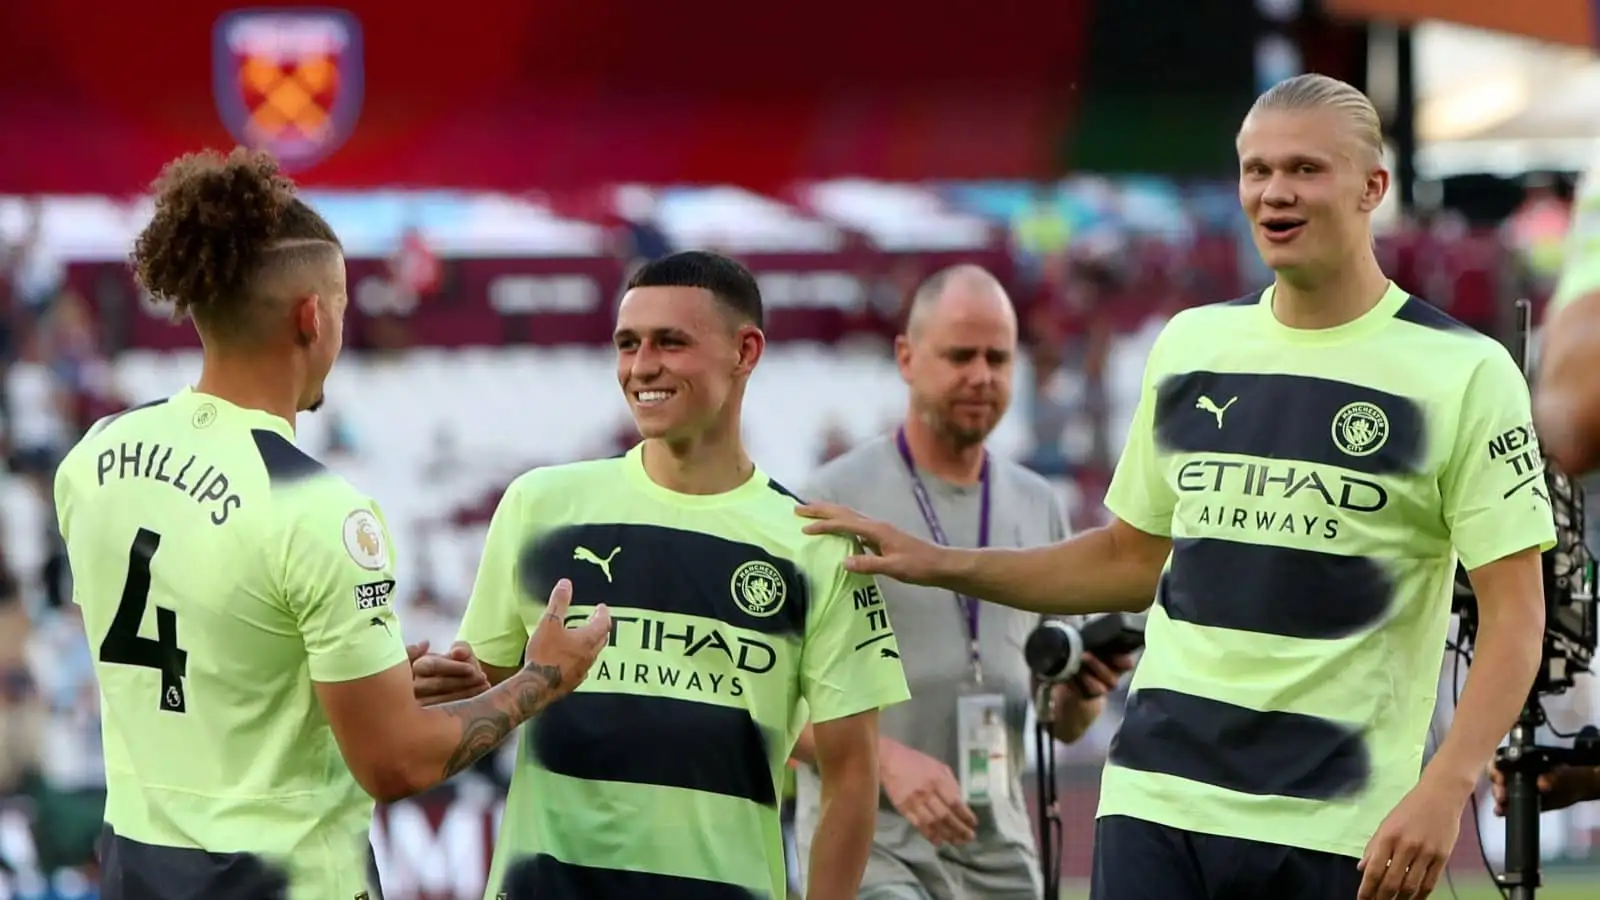 Kalvin Phillips, Phil Foden and Erling Haaland of Man City